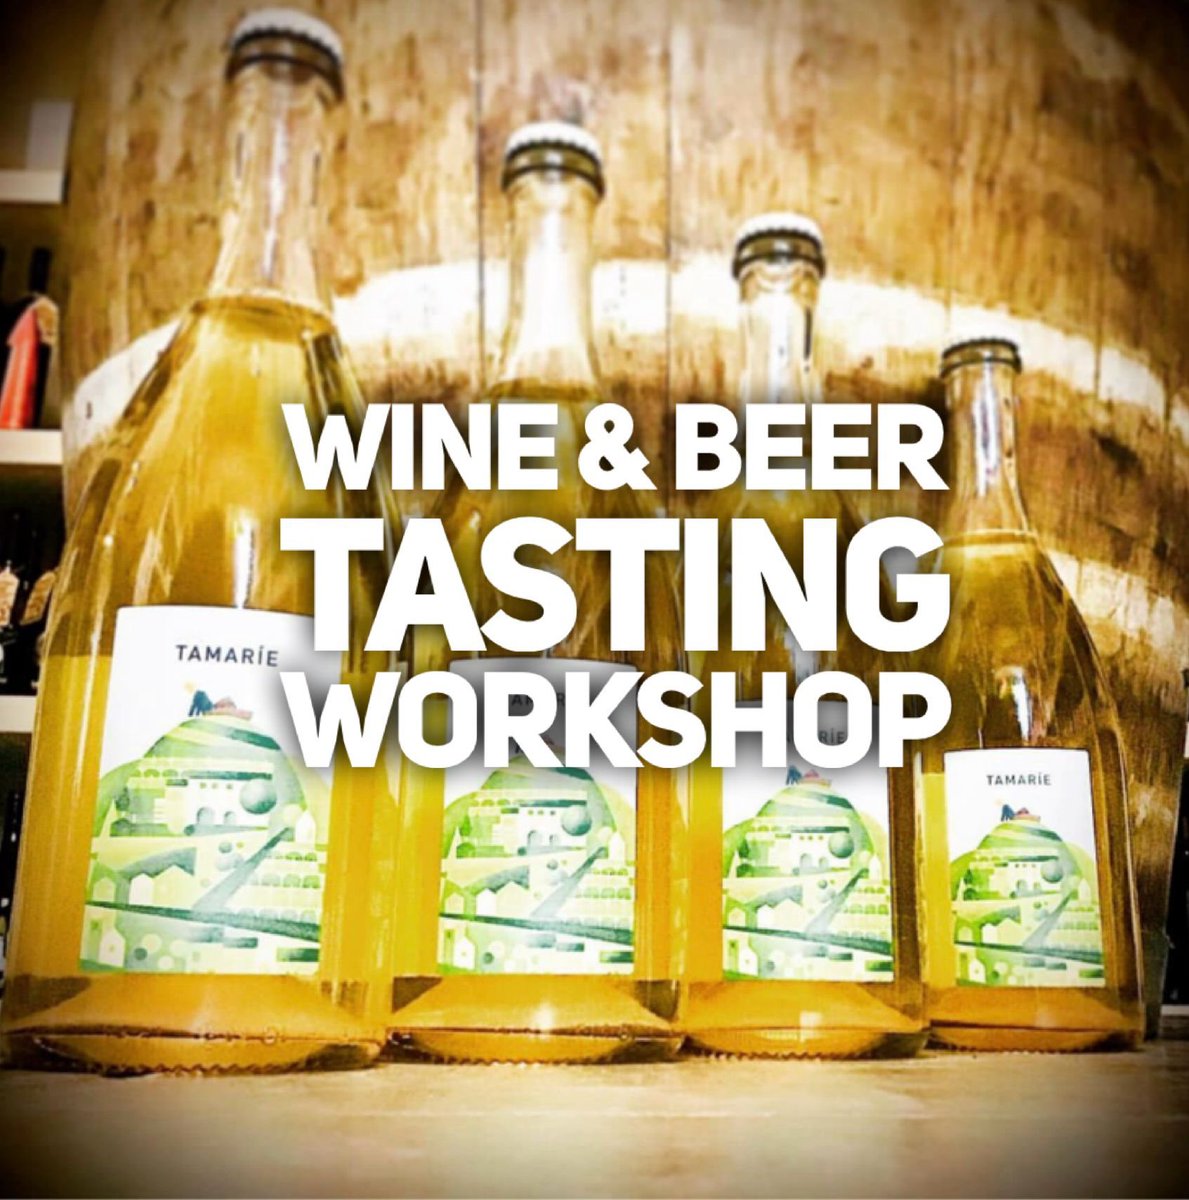 WORKSHOP // Antonio Marino wants to help people rediscover the flavours of the past, the natural and simple ones, without chemistry and excessive manipulation. This workshop will include a tasting of some of Lazio’s natural wines and beers. #ParabereForumRoma